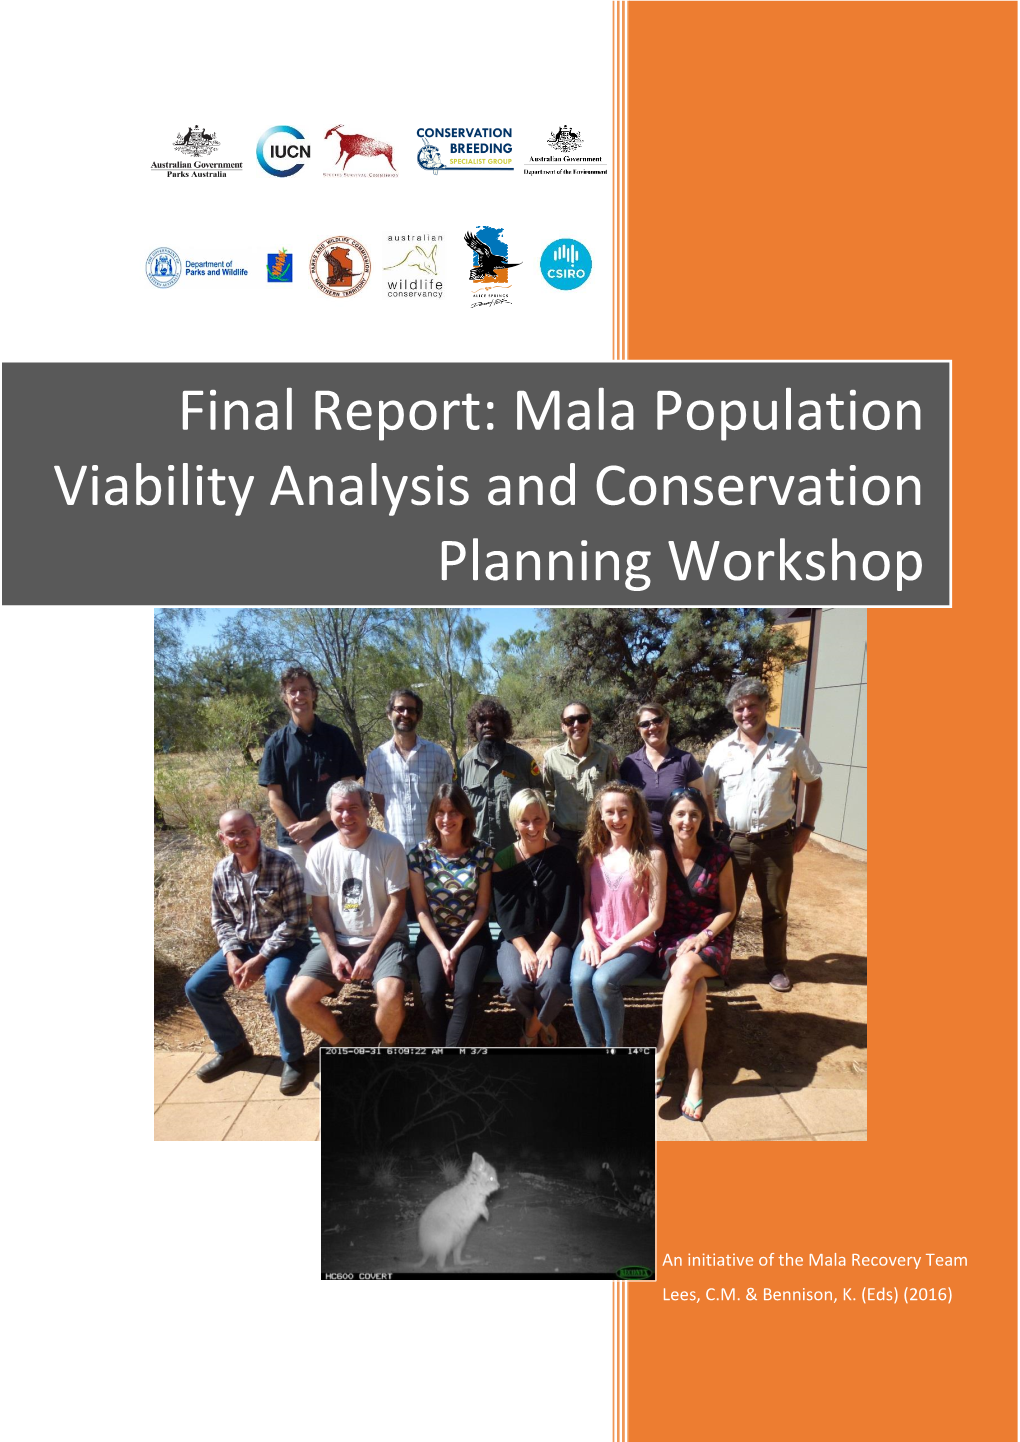 Mala Population Viability Analysis and Conservation Planning Workshop